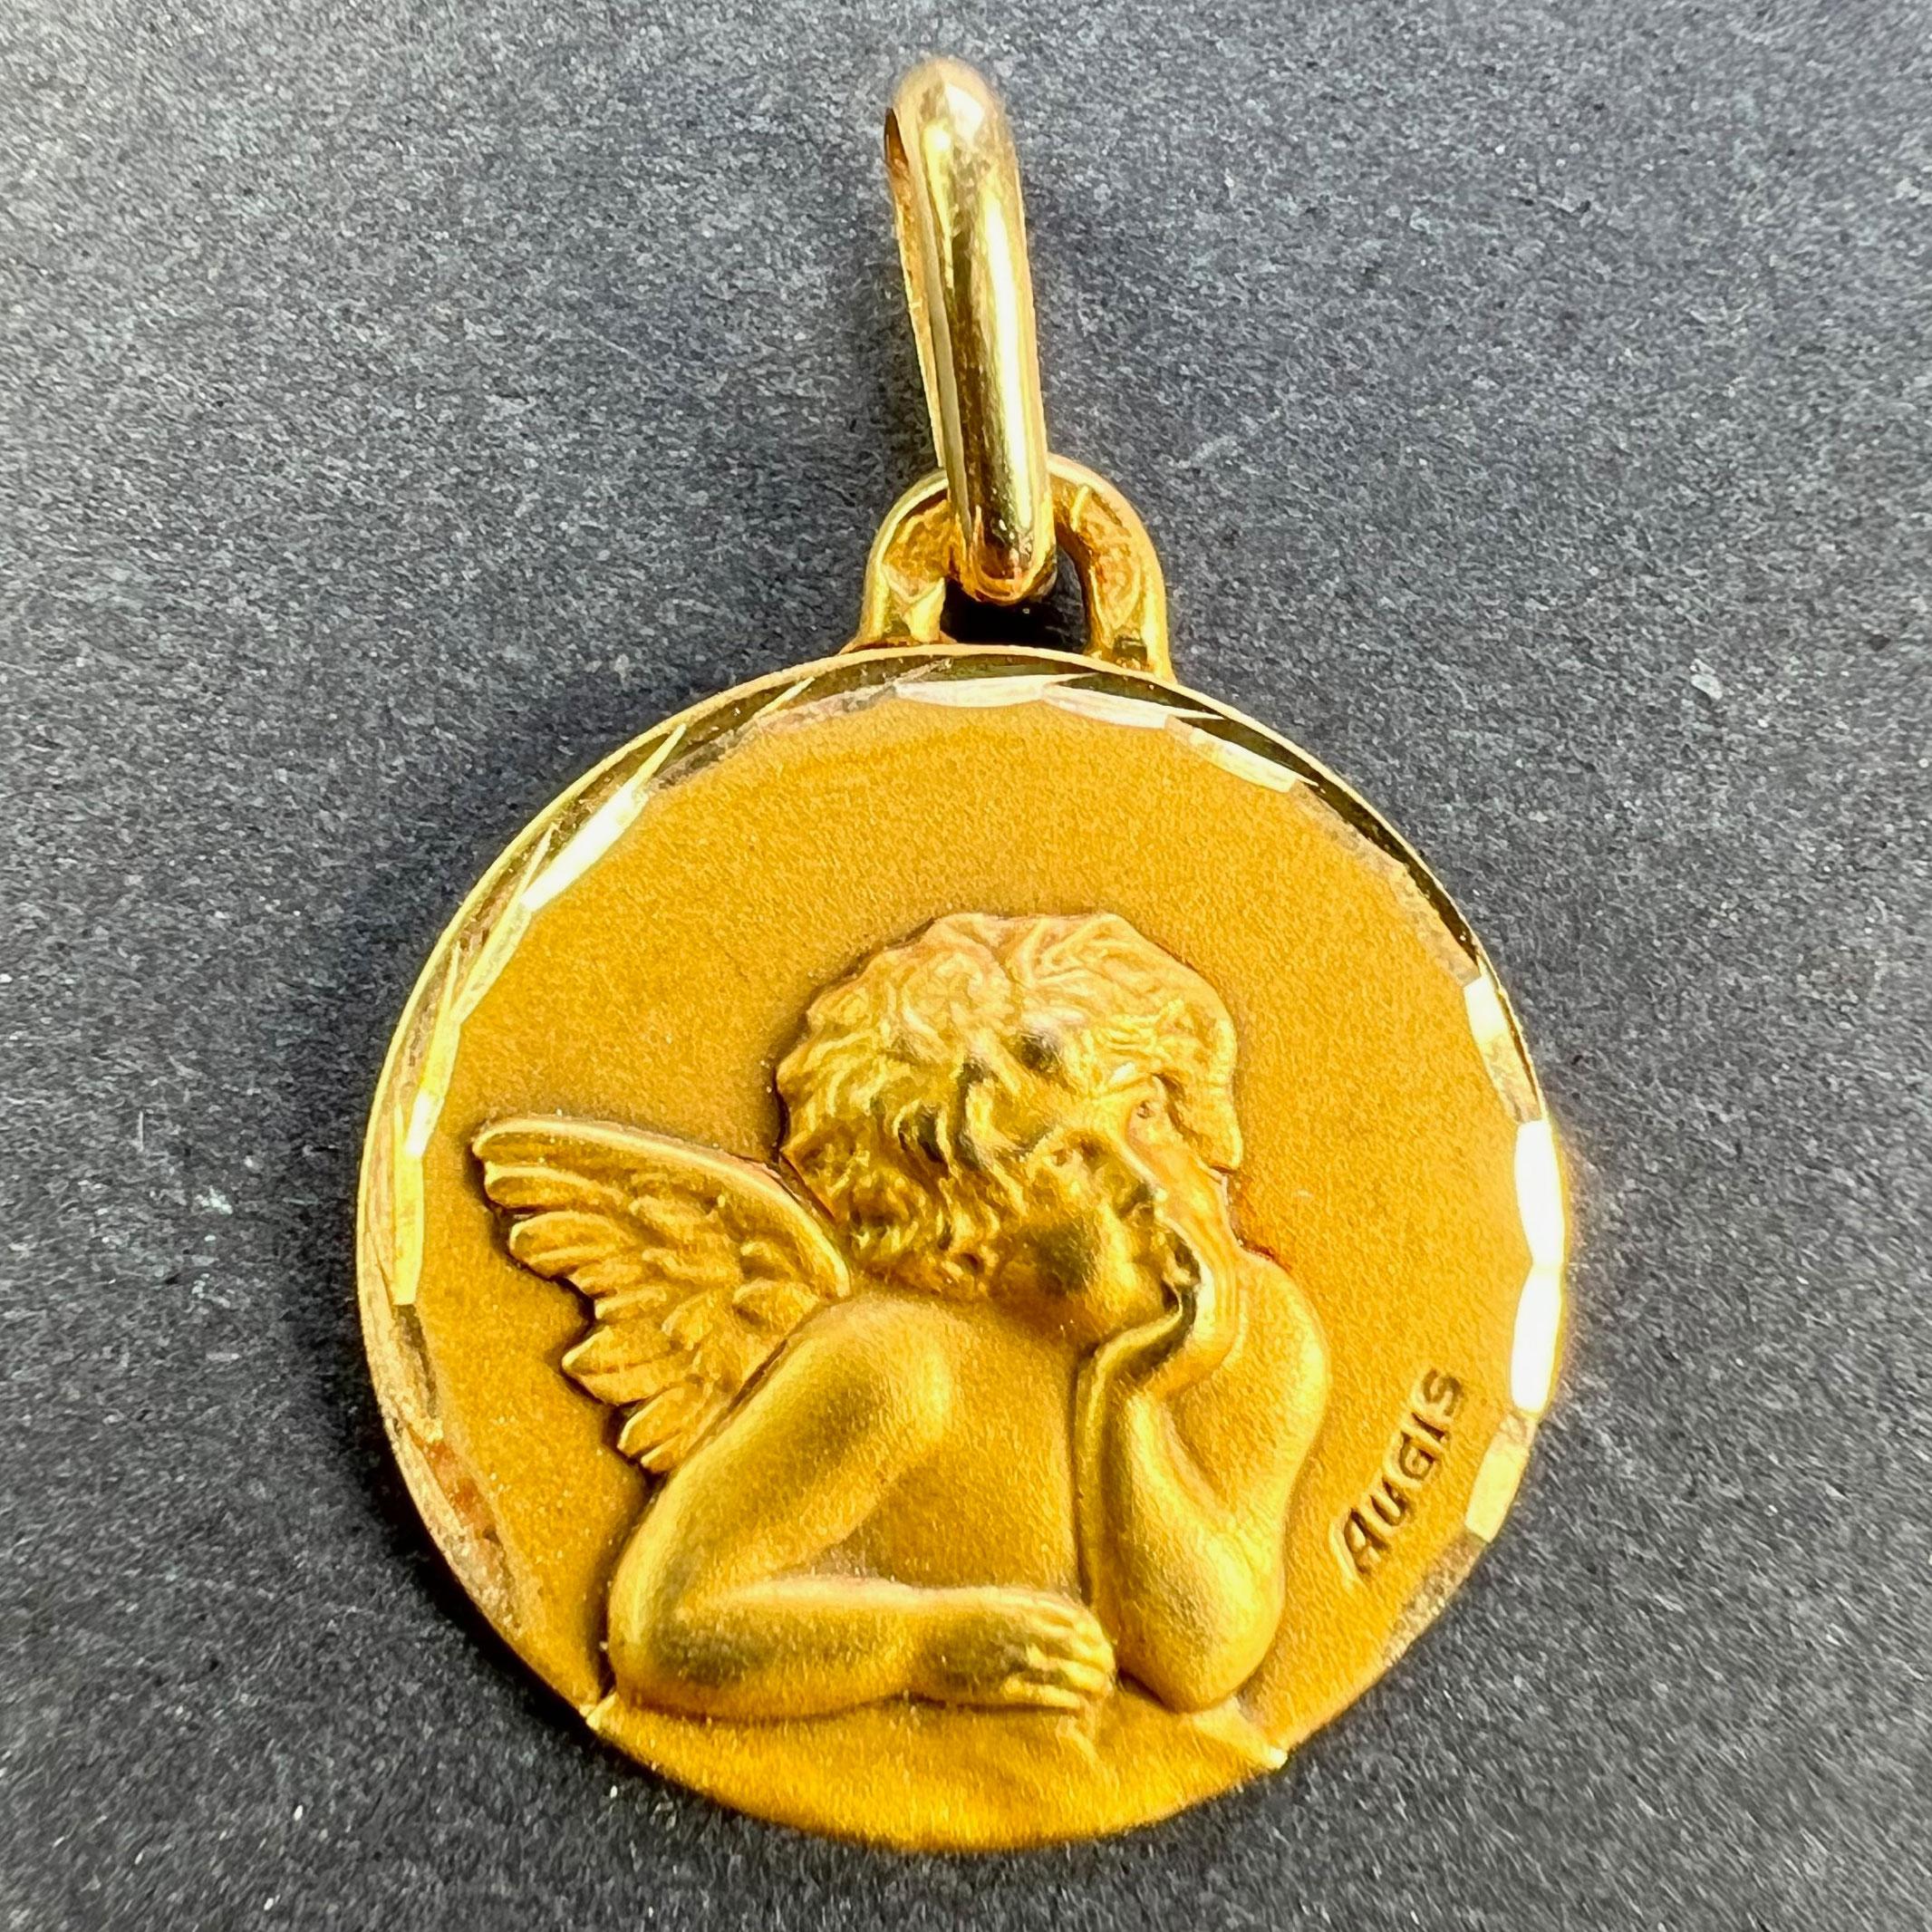 A French 18 karat (18K) yellow gold charm pendant designed as a round medal depicting Raphael’s cherub. Signed Augis. Stamped with the eagle mark for 18 karat gold and French manufacture with an unknown maker's mark. The reverse marked A for